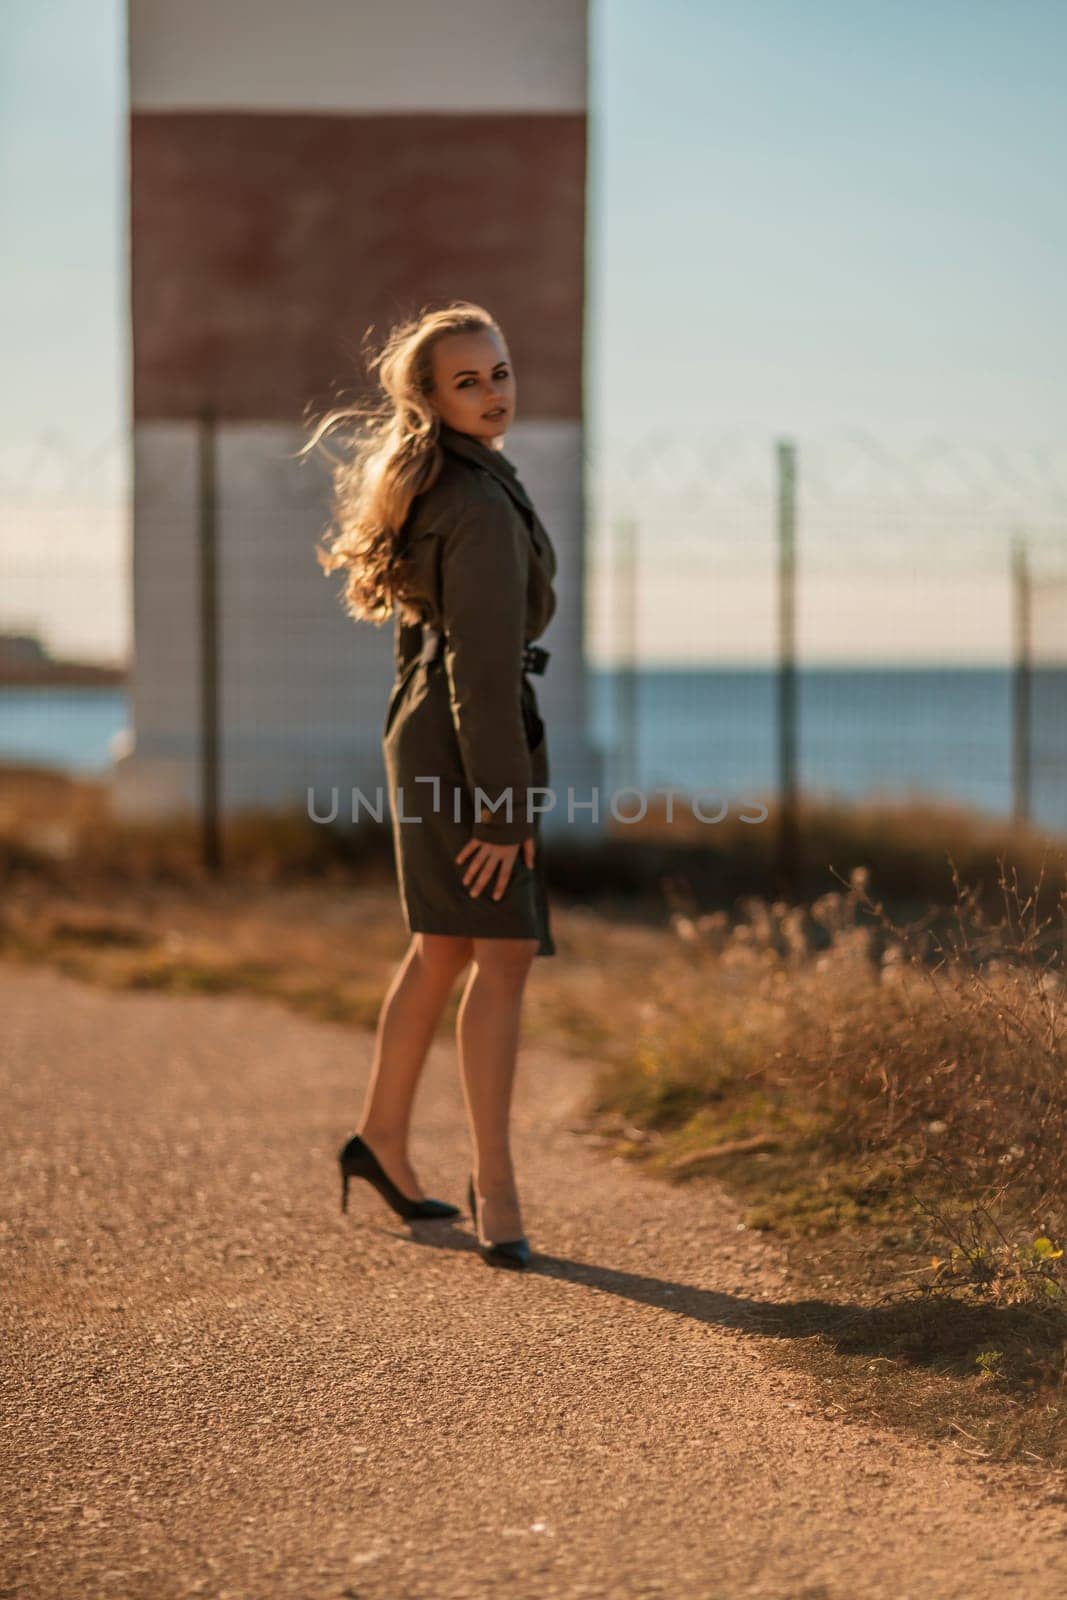 Portrait blonde sea cape. A calm young blonde in a khaki raincoat stands on the seashore against the backdrop of a lighthouse